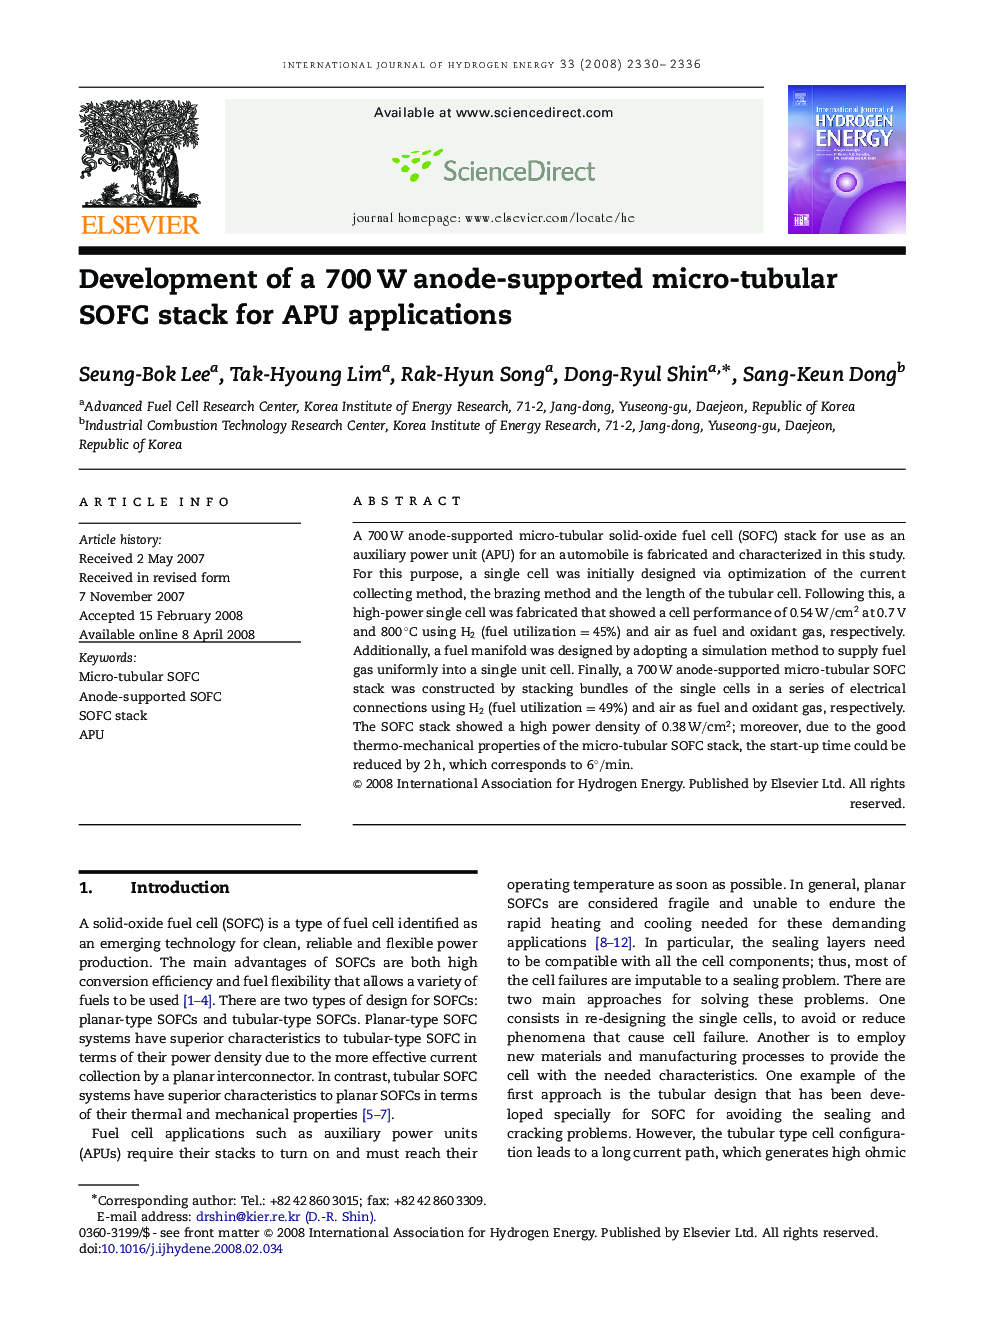 Development of a 700 W anode-supported micro-tubular SOFC stack for APU applications